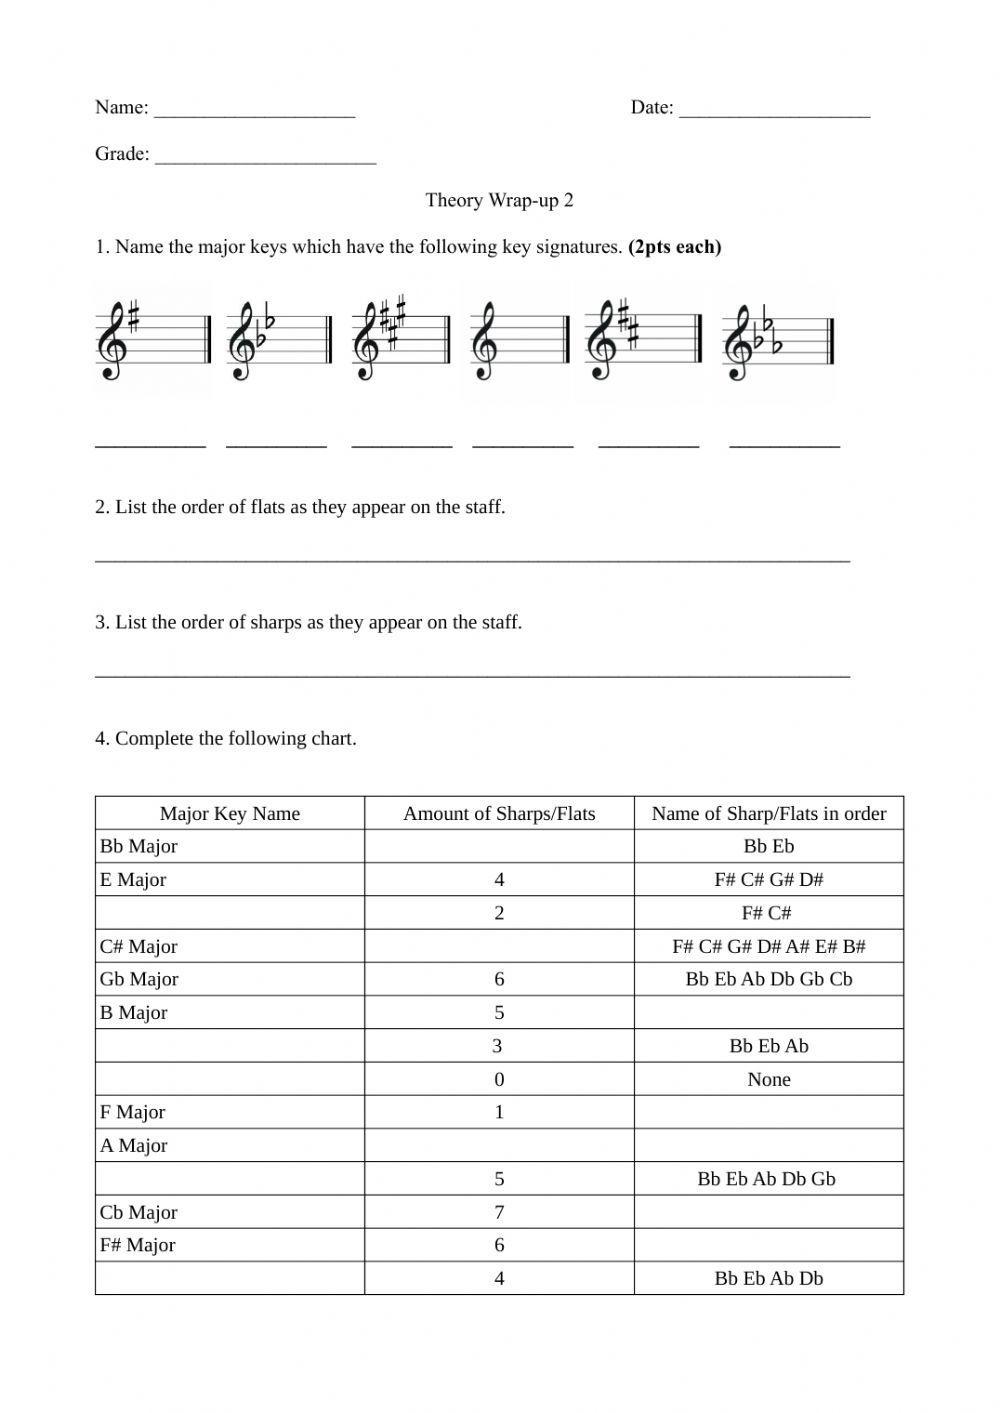 Time and Key Signature Review